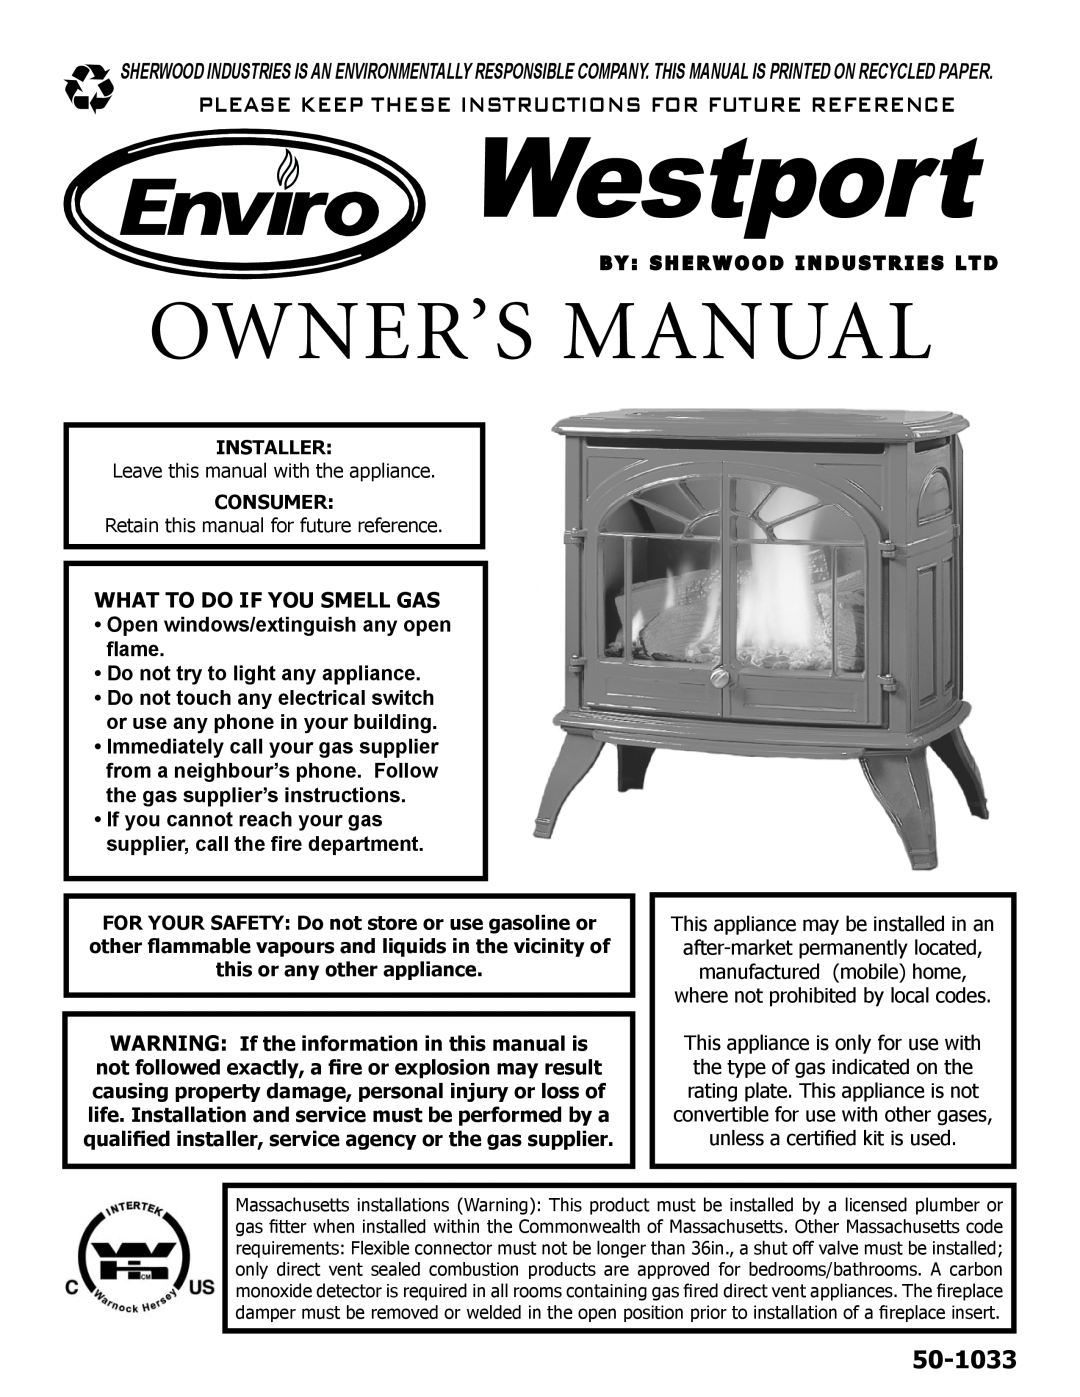 Enviro 50-1033 owner manual What To Do If You Smell Gas, Installer, Consumer, Westport 